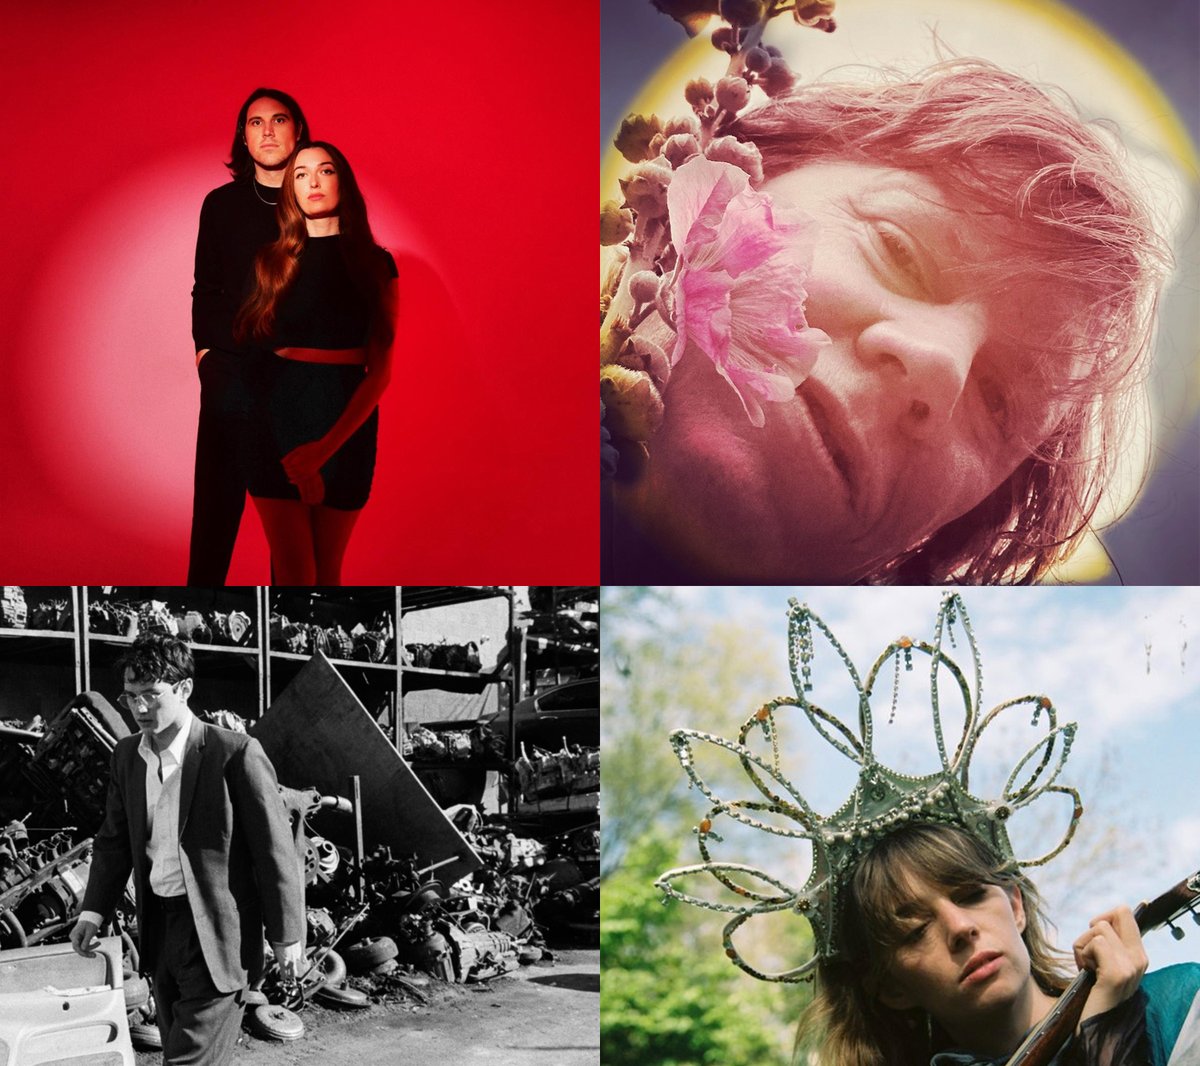 This week's Songs of the Week also includes the latest tracks by Thurston Moore (@nowjazznow), Storefront Church (@lukasscottfrank), Cults (@CultsCultsCults), Maya Hawke (@MomAndPopMusic), and more. undertheradarmag.com/news/10_best_s…